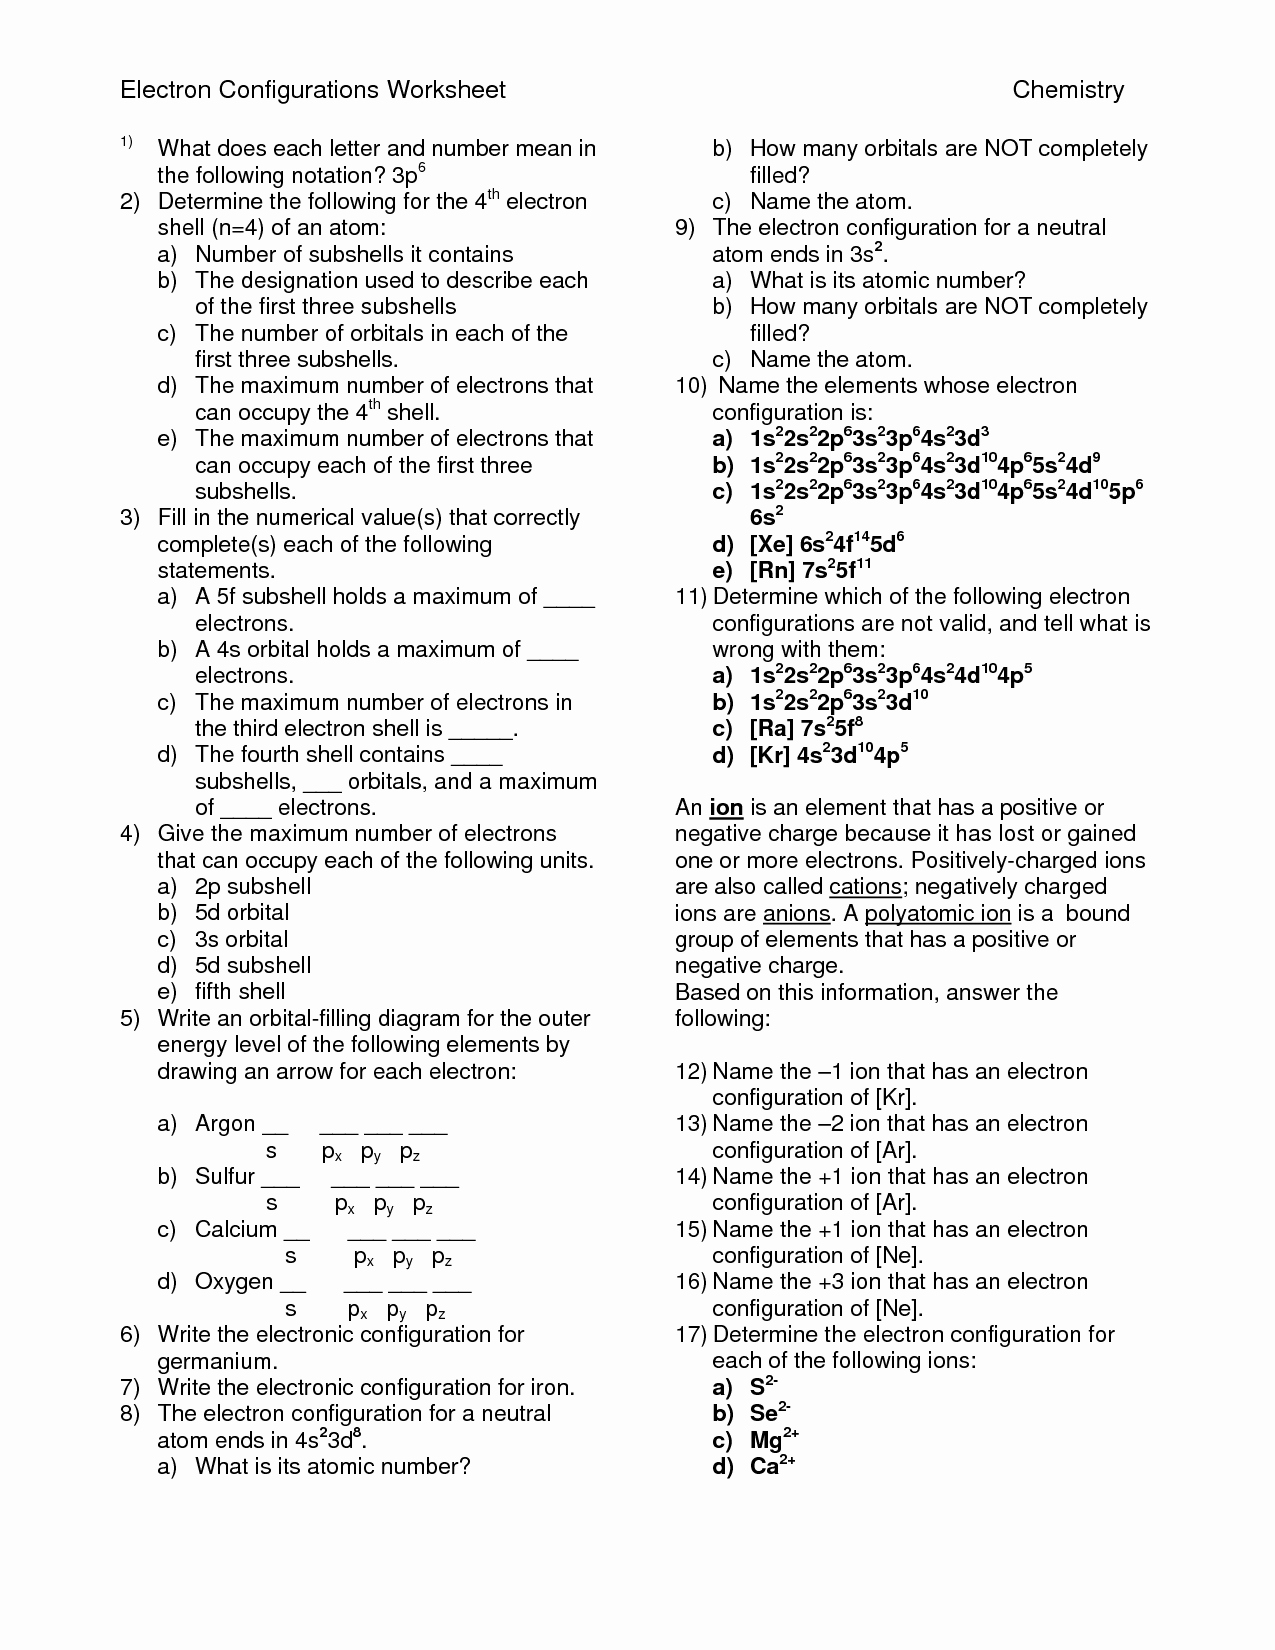 Electron Configuration Worksheet Answer Key Lovely 13 Best Of High School Chemistry Worksheet Answers